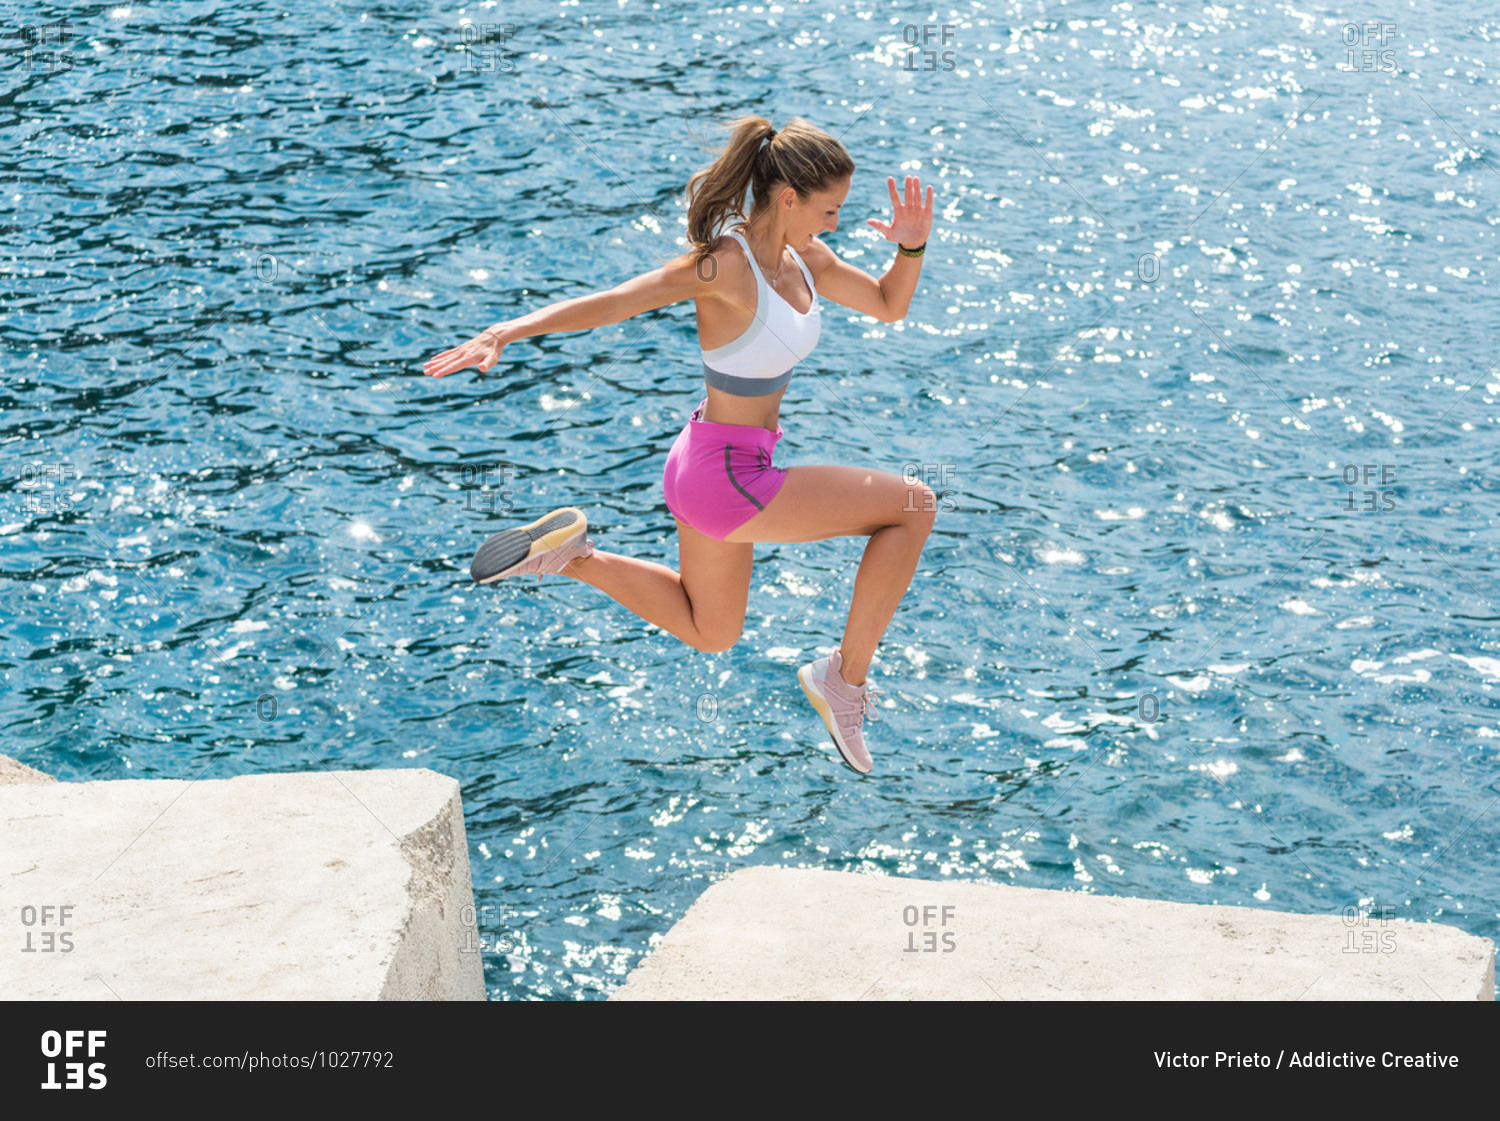 Side view of strong female athlete in sportswear in moment of jumping on breakwater boulders during training at seaside in summer